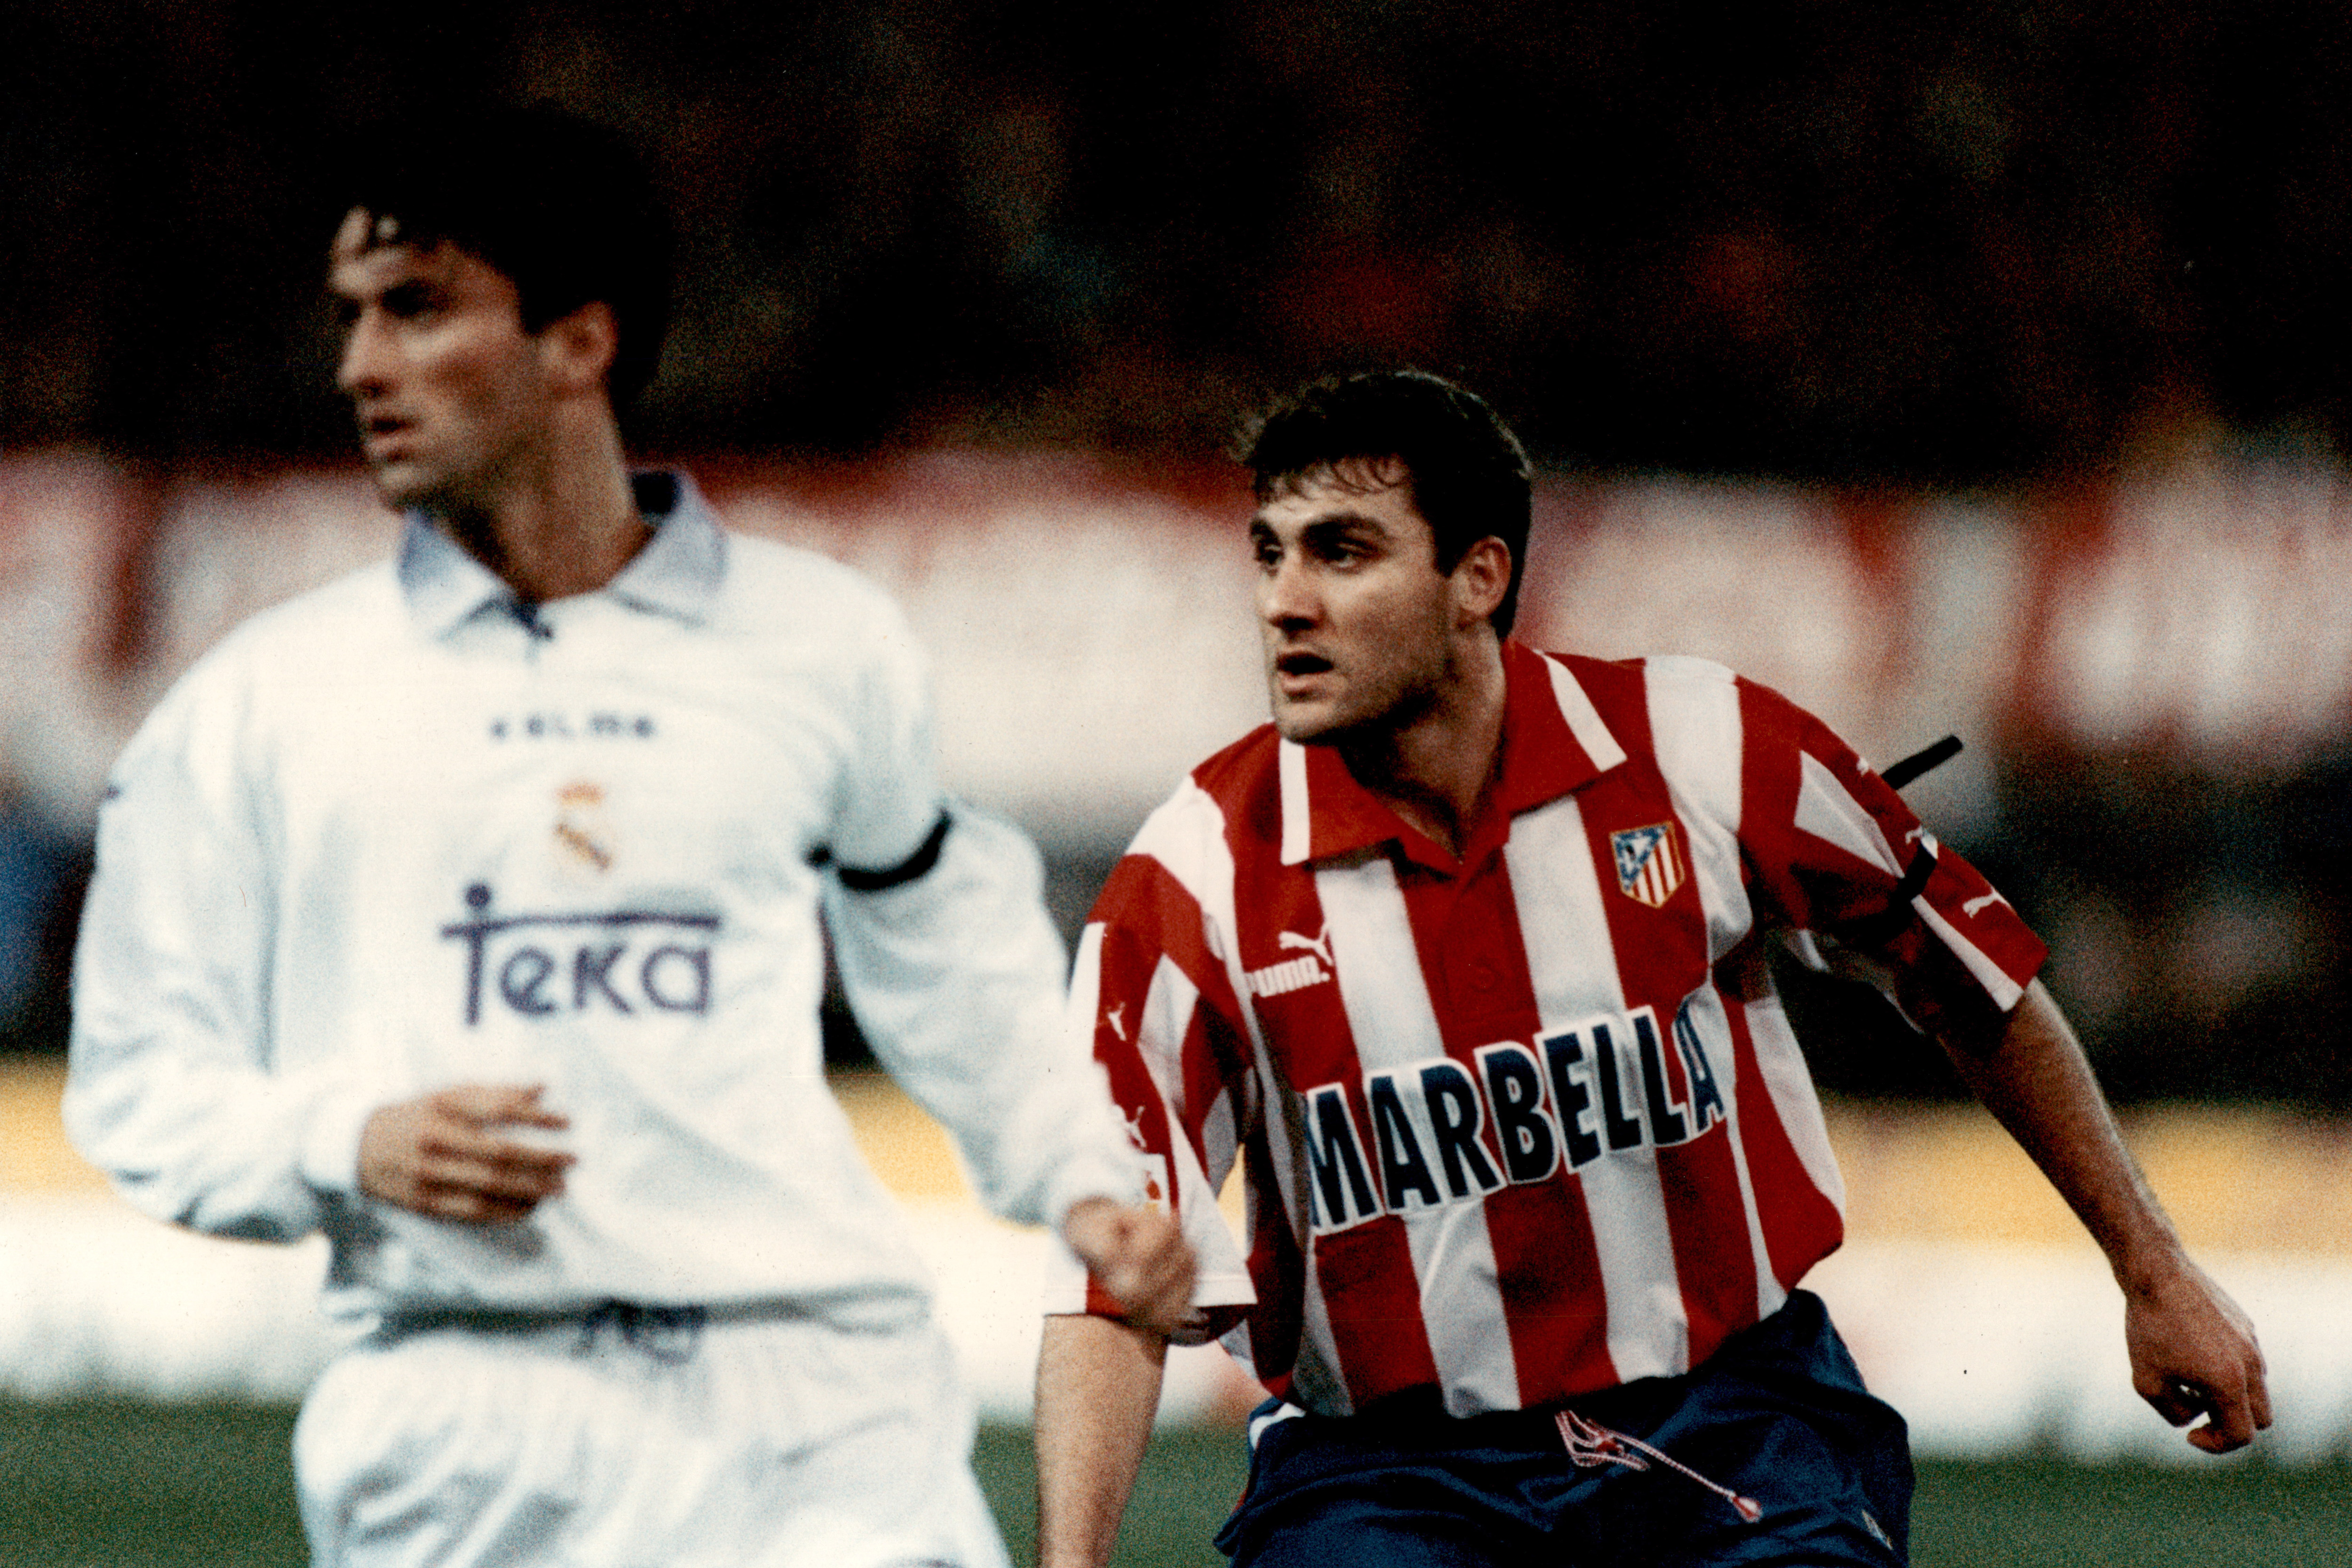 Italian footballers Christian Panucci and Christian Vieri in action for Real Madrid and Atletico in a derby match in 1998.